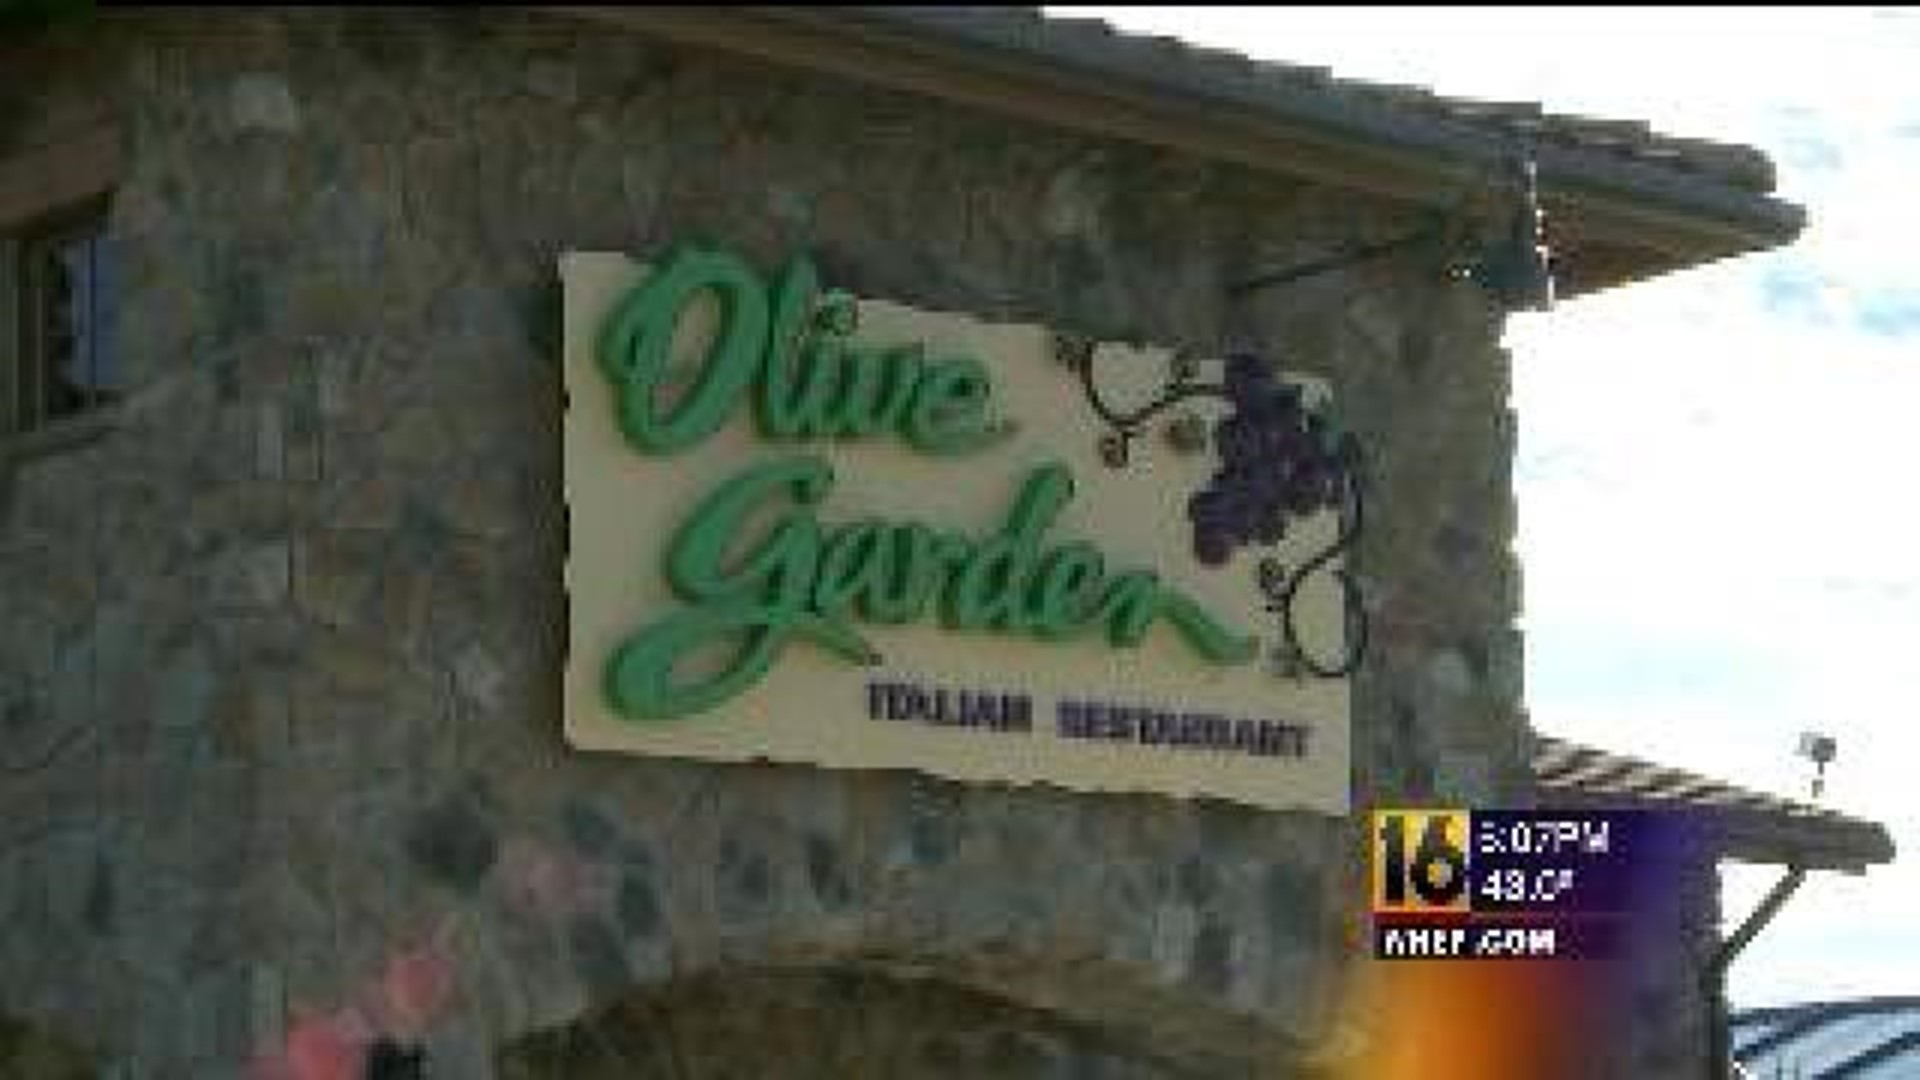 Employees Wanted at the Olive Garden